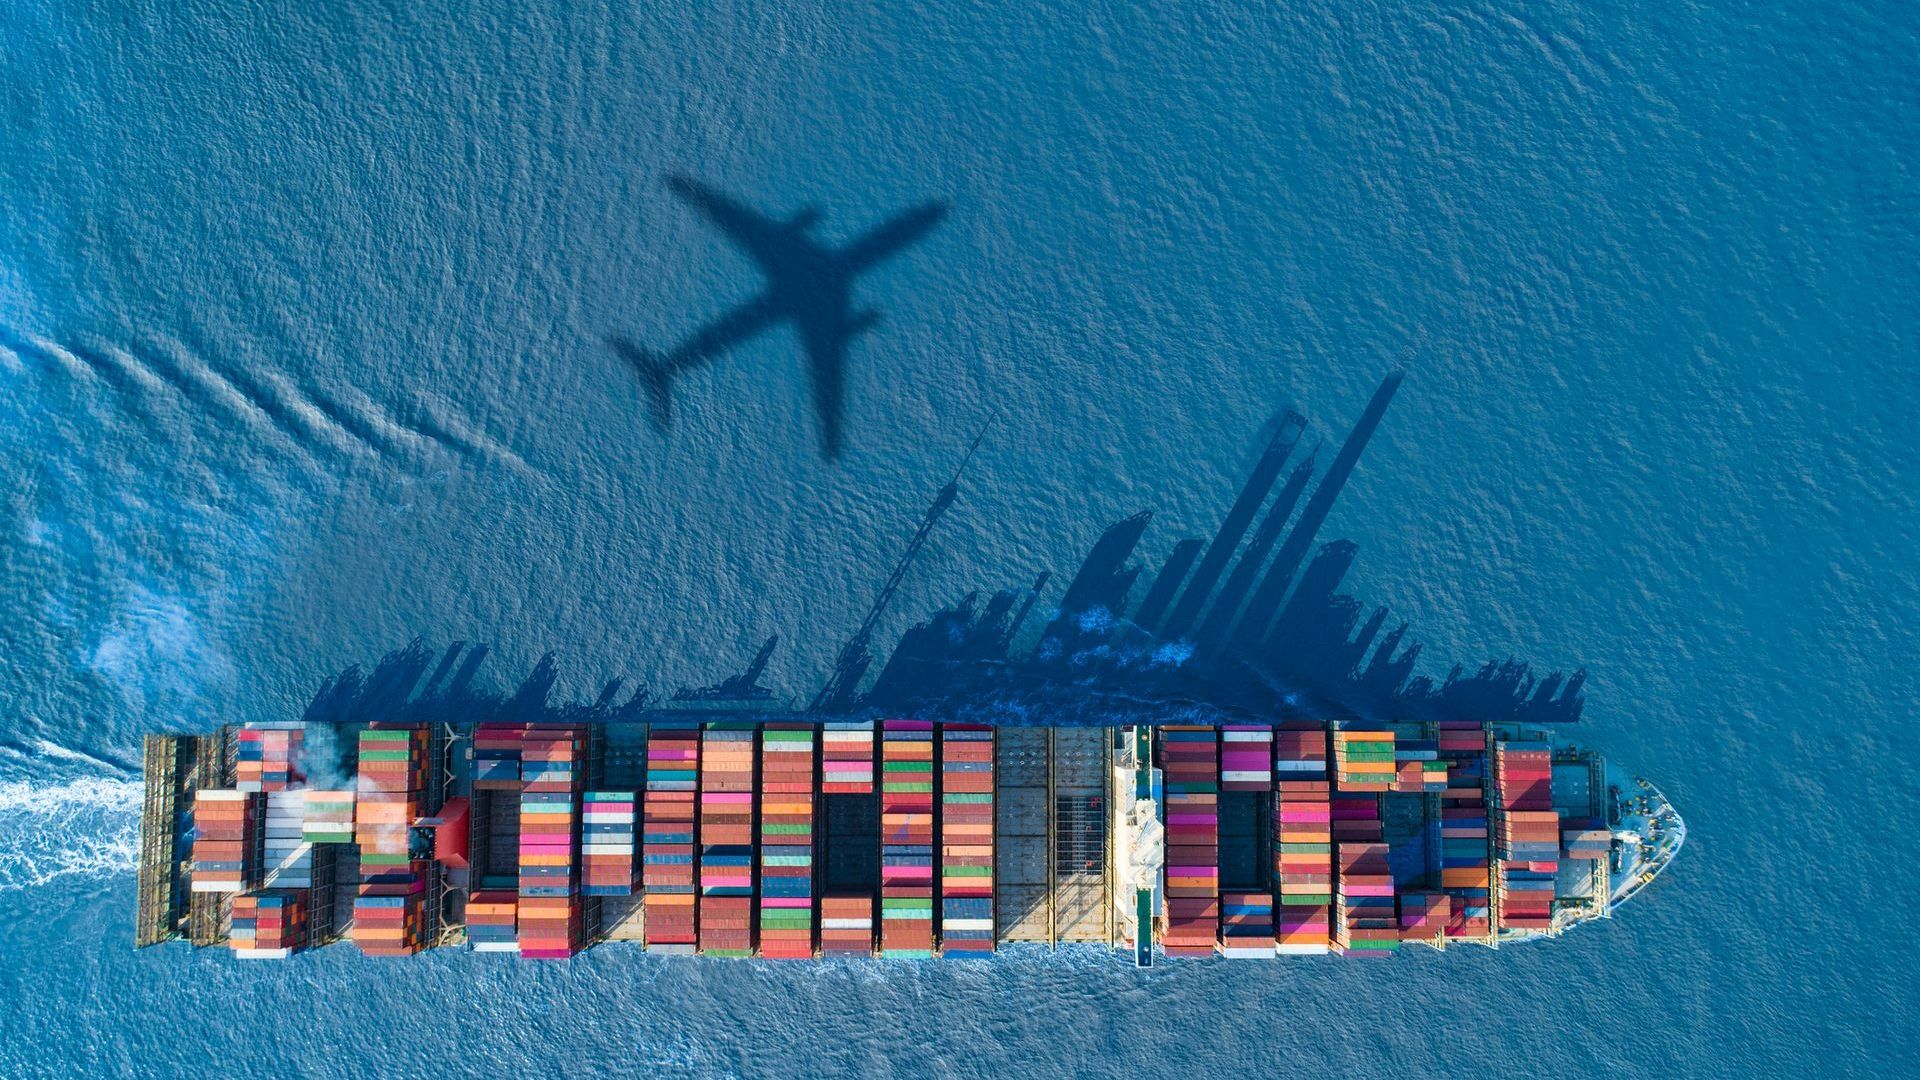 An aerial view of a large container ship in the ocean.